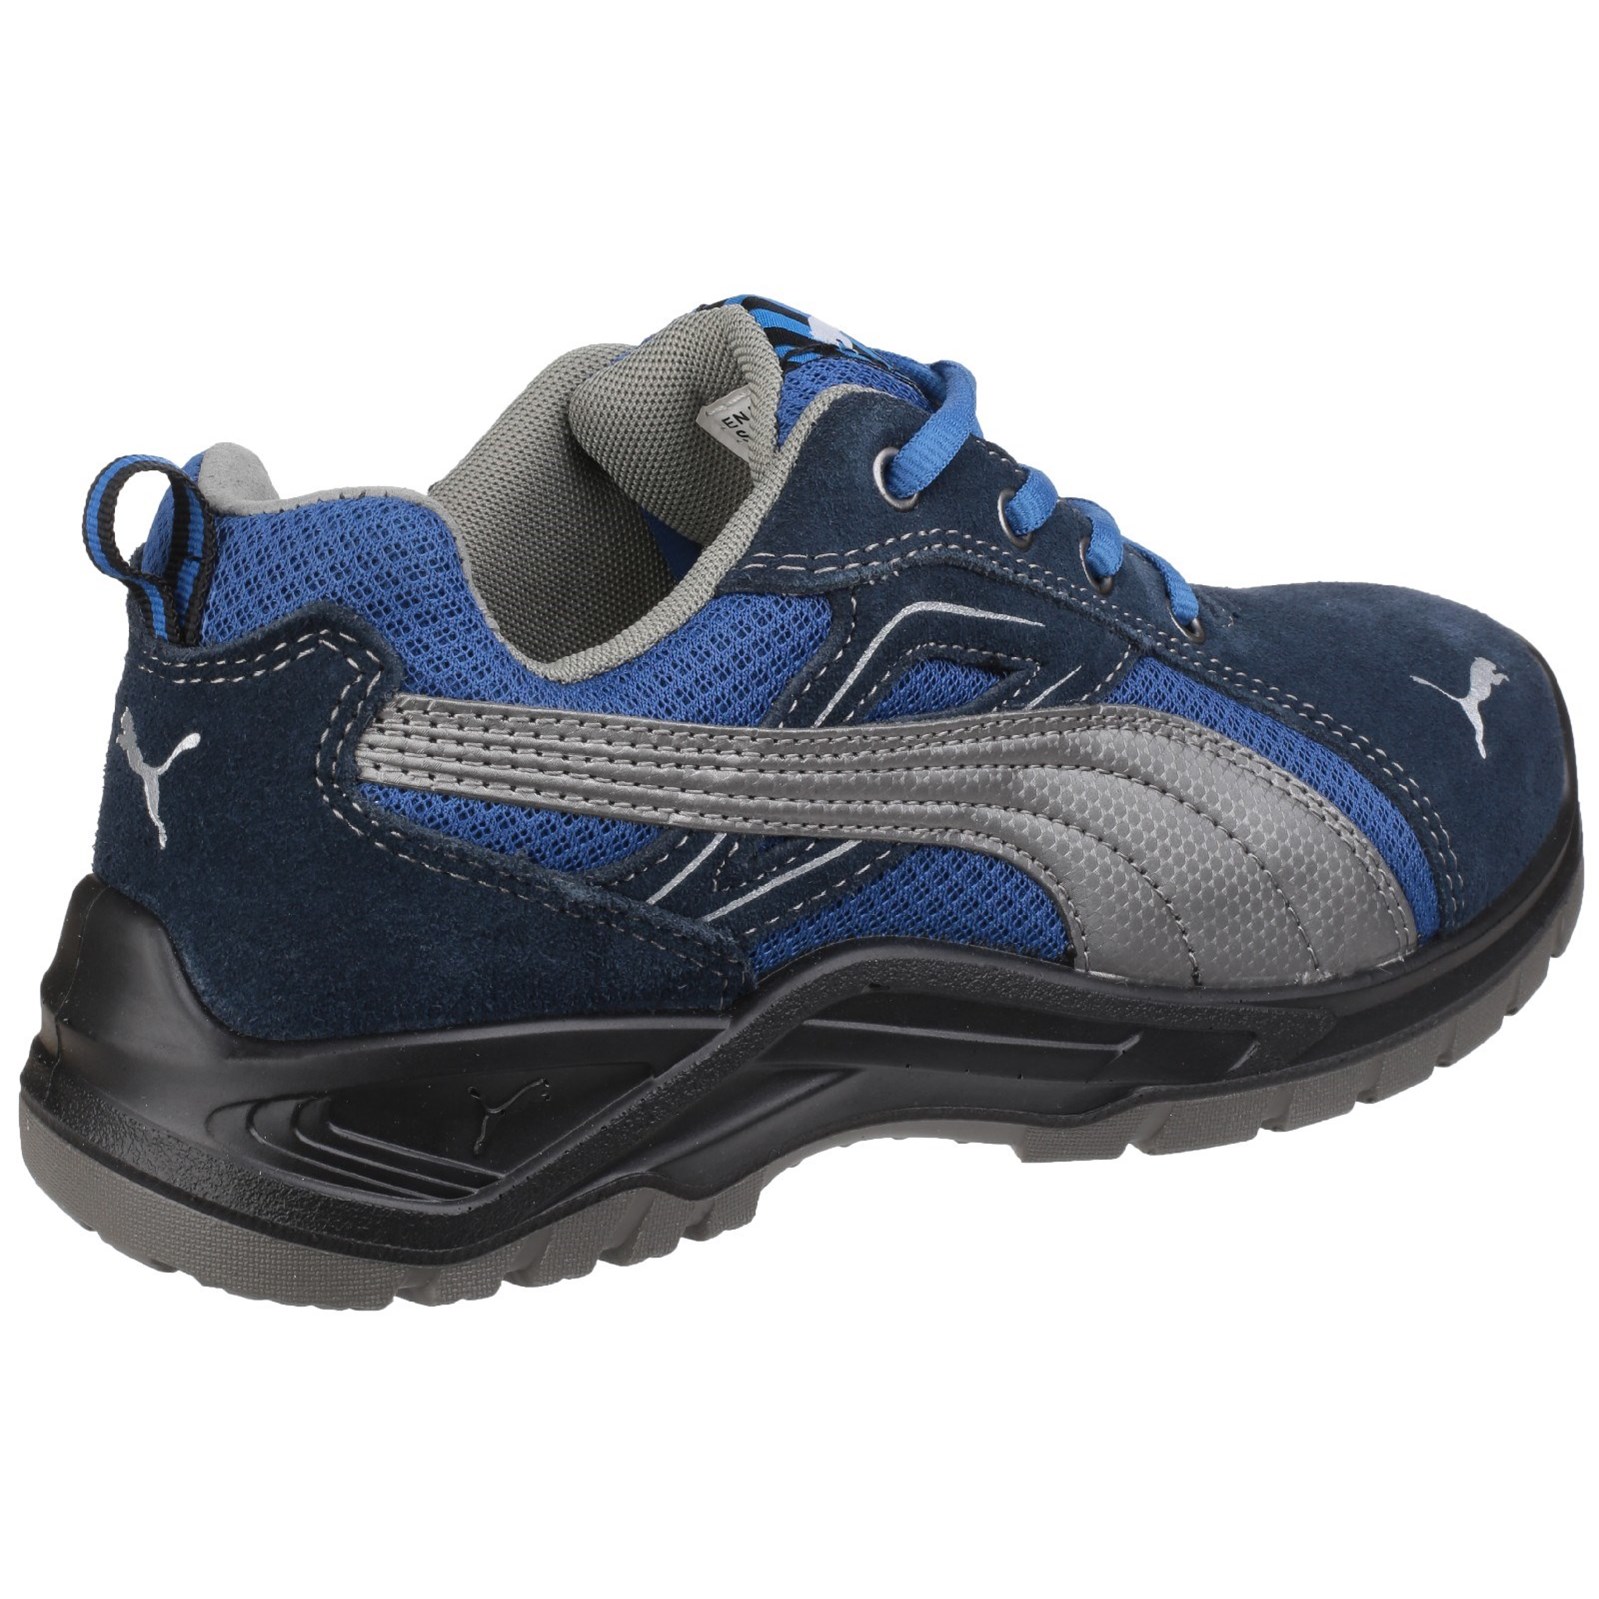 PUMA Omni Sky Low Mens Safety Trainers Steel Toe